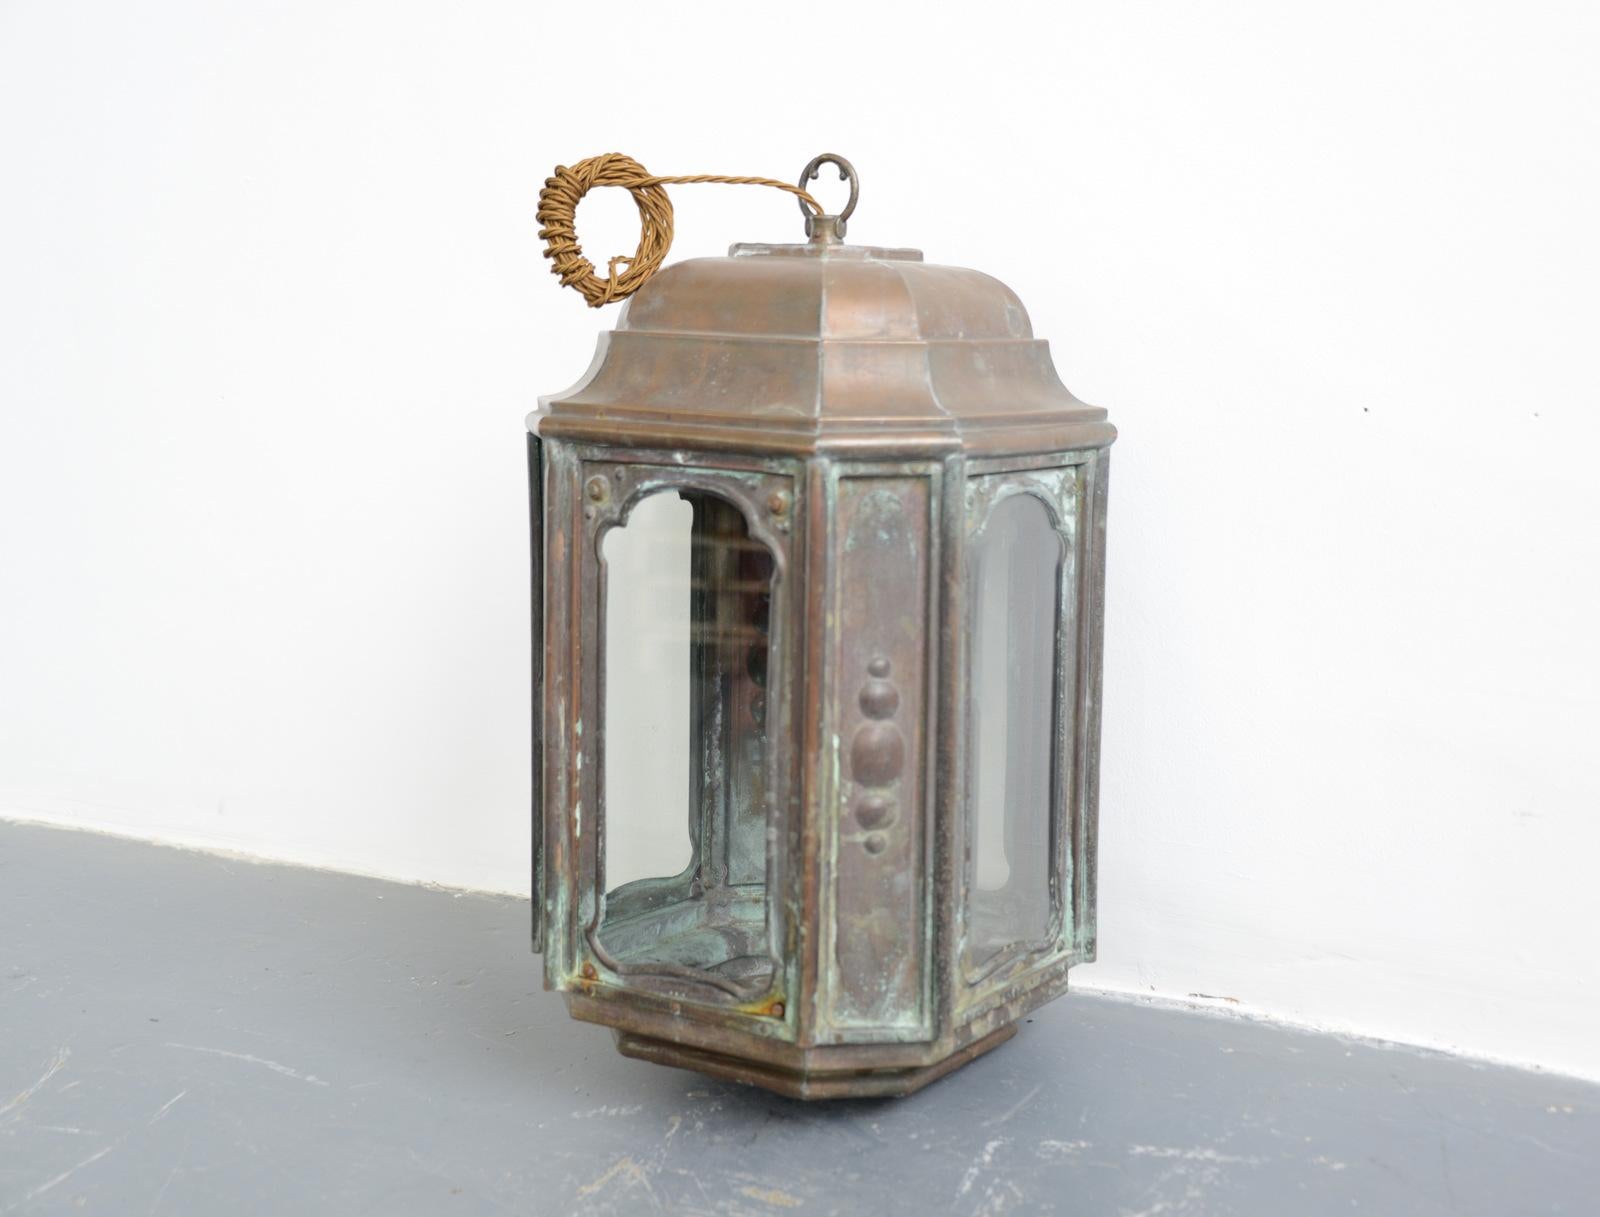 French Art Nouveau copper lantern, circa 1900

- Ornate copper casing
- 4 windows, 2 with bevelled glass, 2 with flat glass
- Takes E27 fitting bulbs
- French, 1900
- Measures: 58cm tall x 30cm wide x 30cm deep

Condition report

Fully re